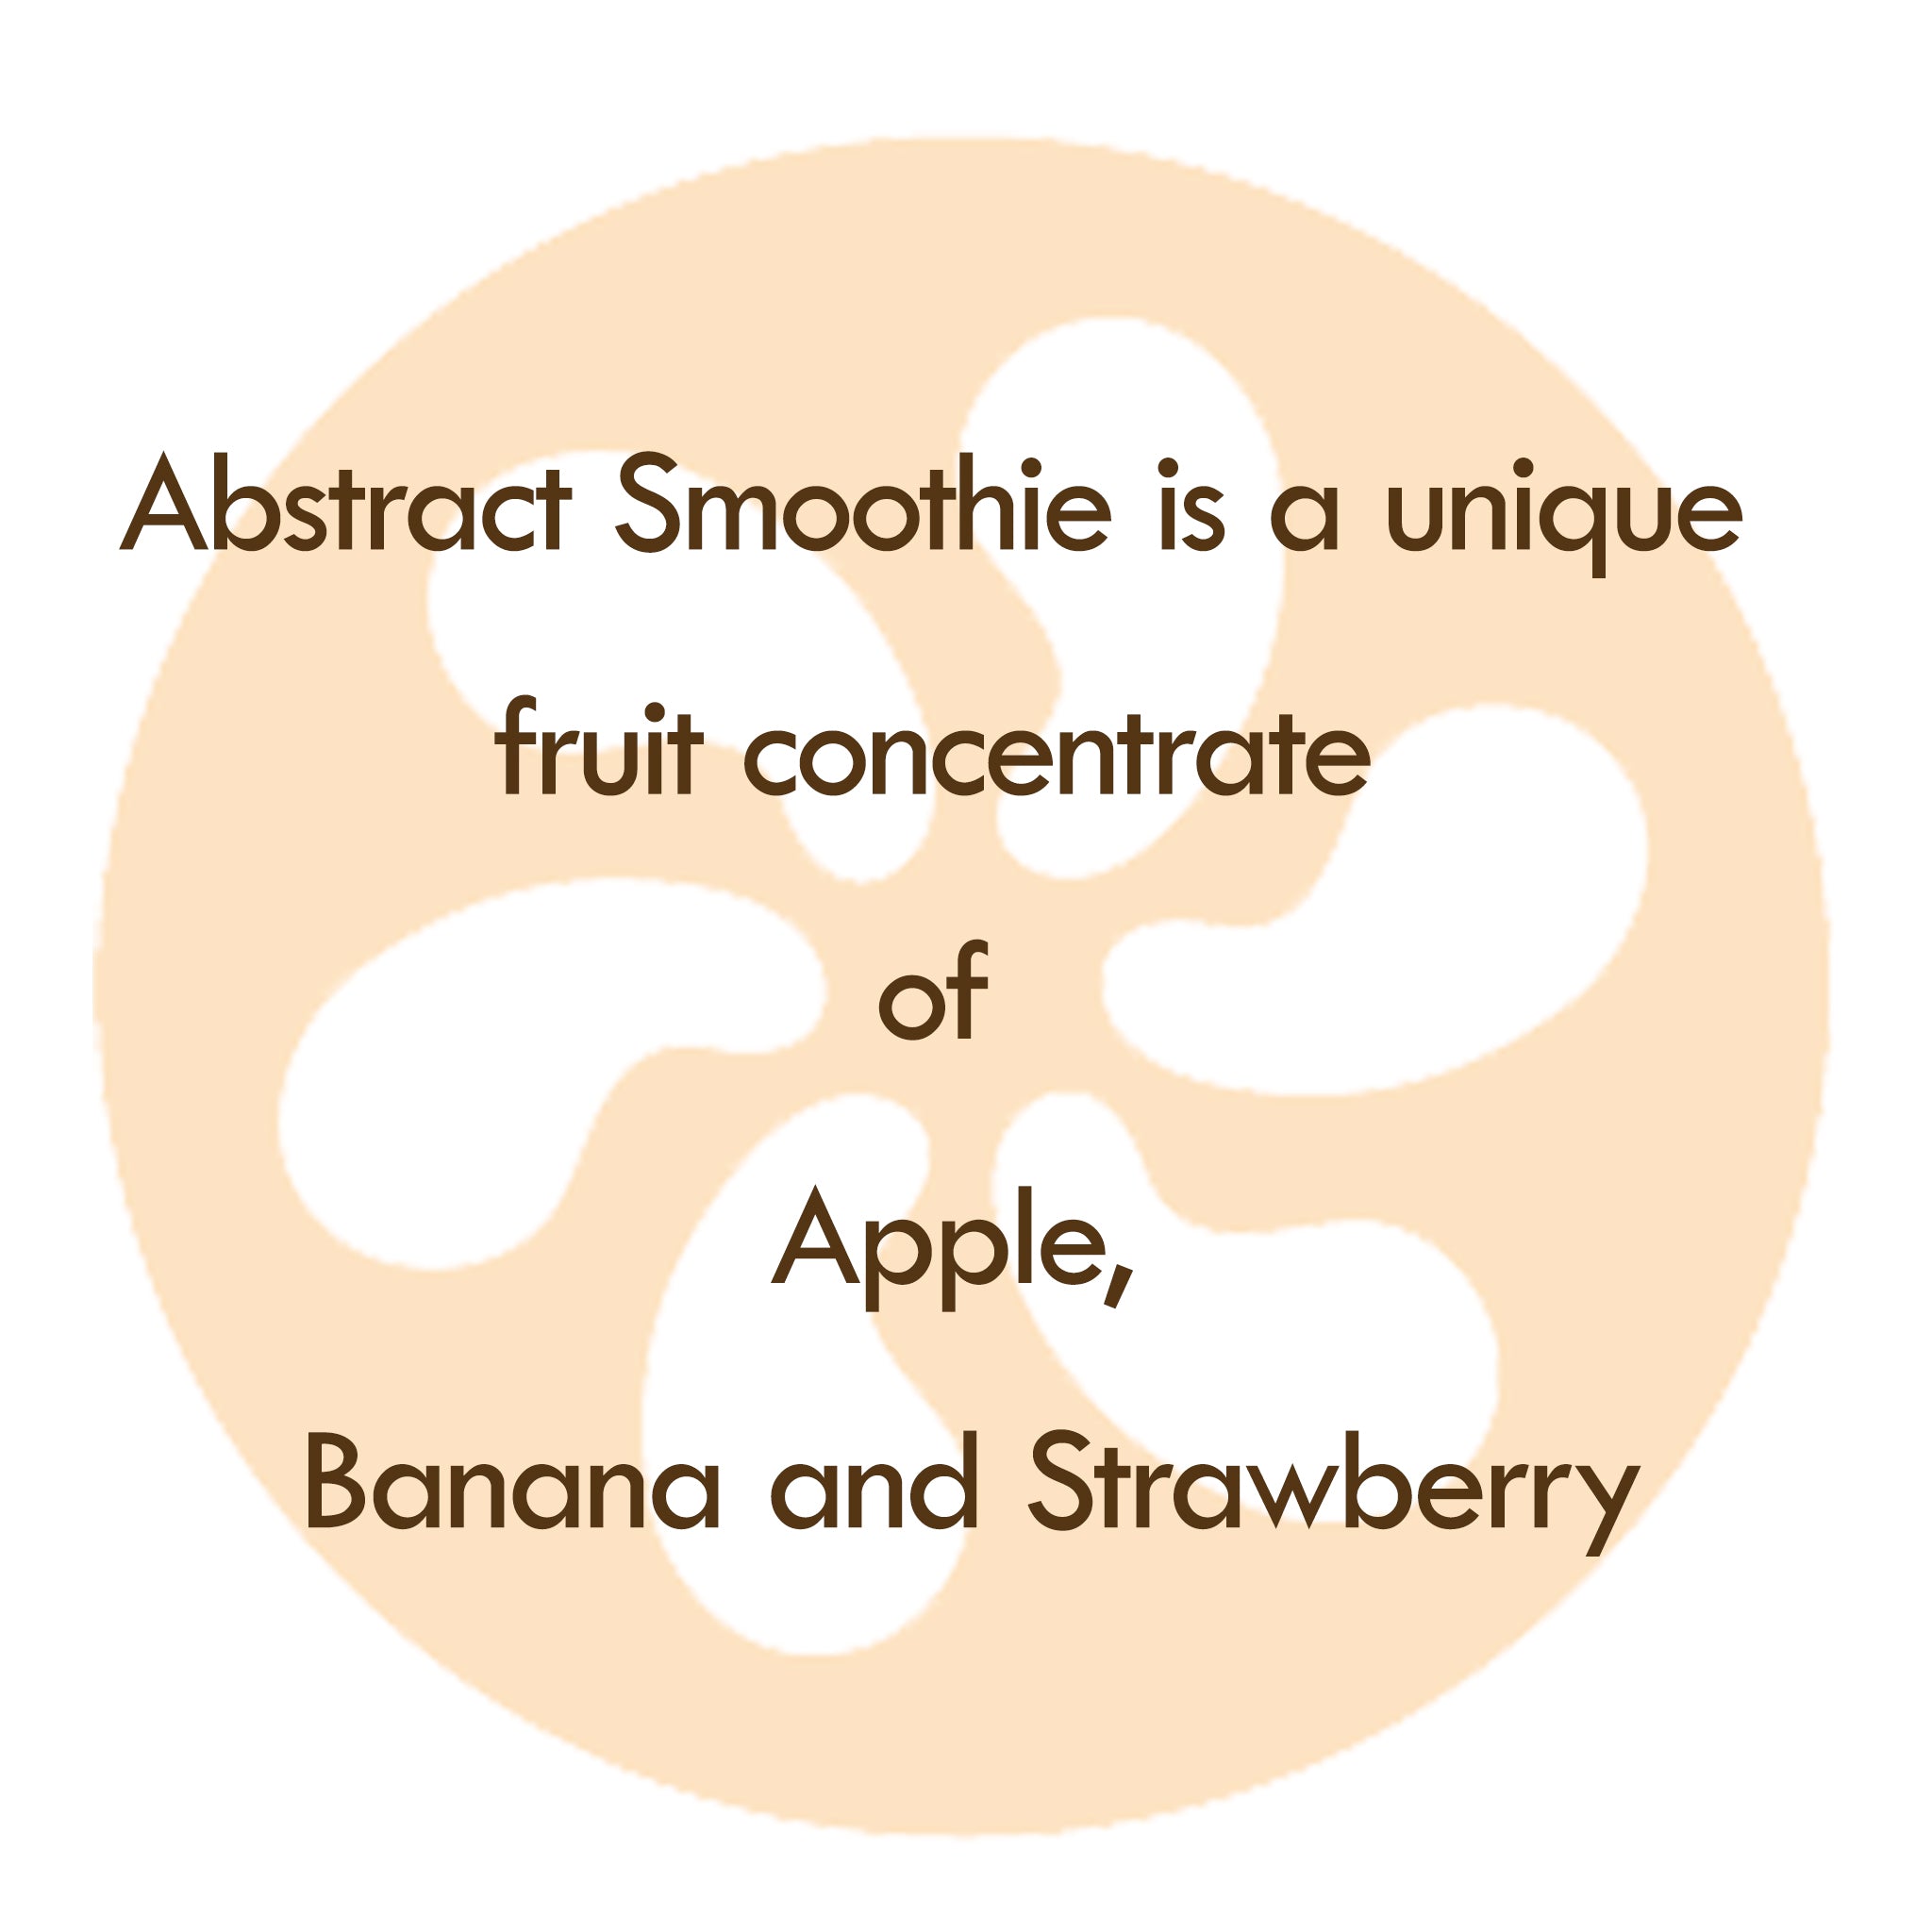 Our abstract smoothie is a concentrate of Apple, Banana and Strawberry. 